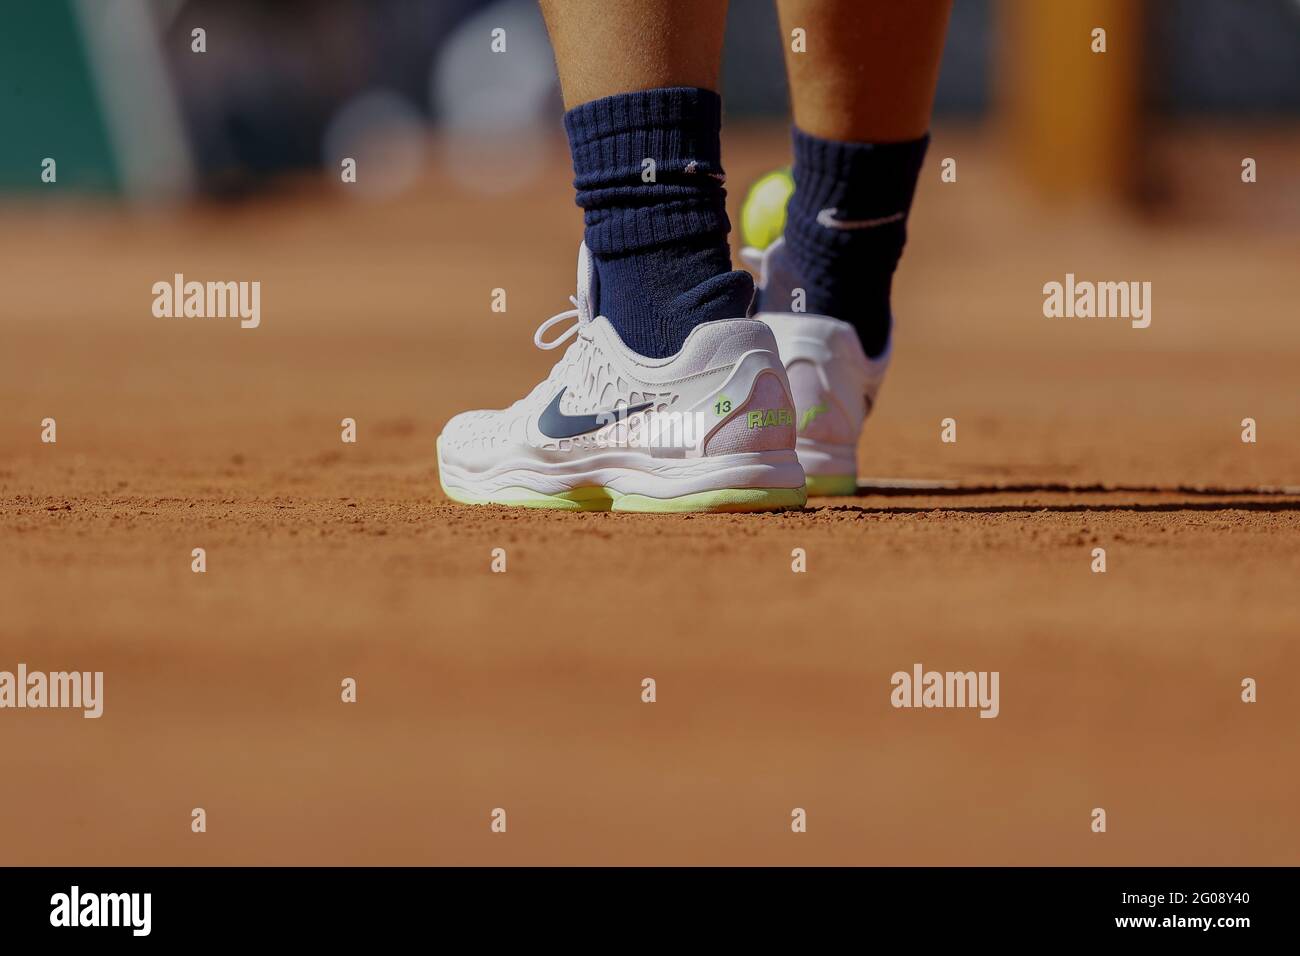 Rafael Nadal of Spain, illustration shoes with special inscription "13"  during the first round of Roland-Garros 2021, Grand Slam tennis tournament  on June 01, 2021 at Roland-Garros stadium in Paris, France -